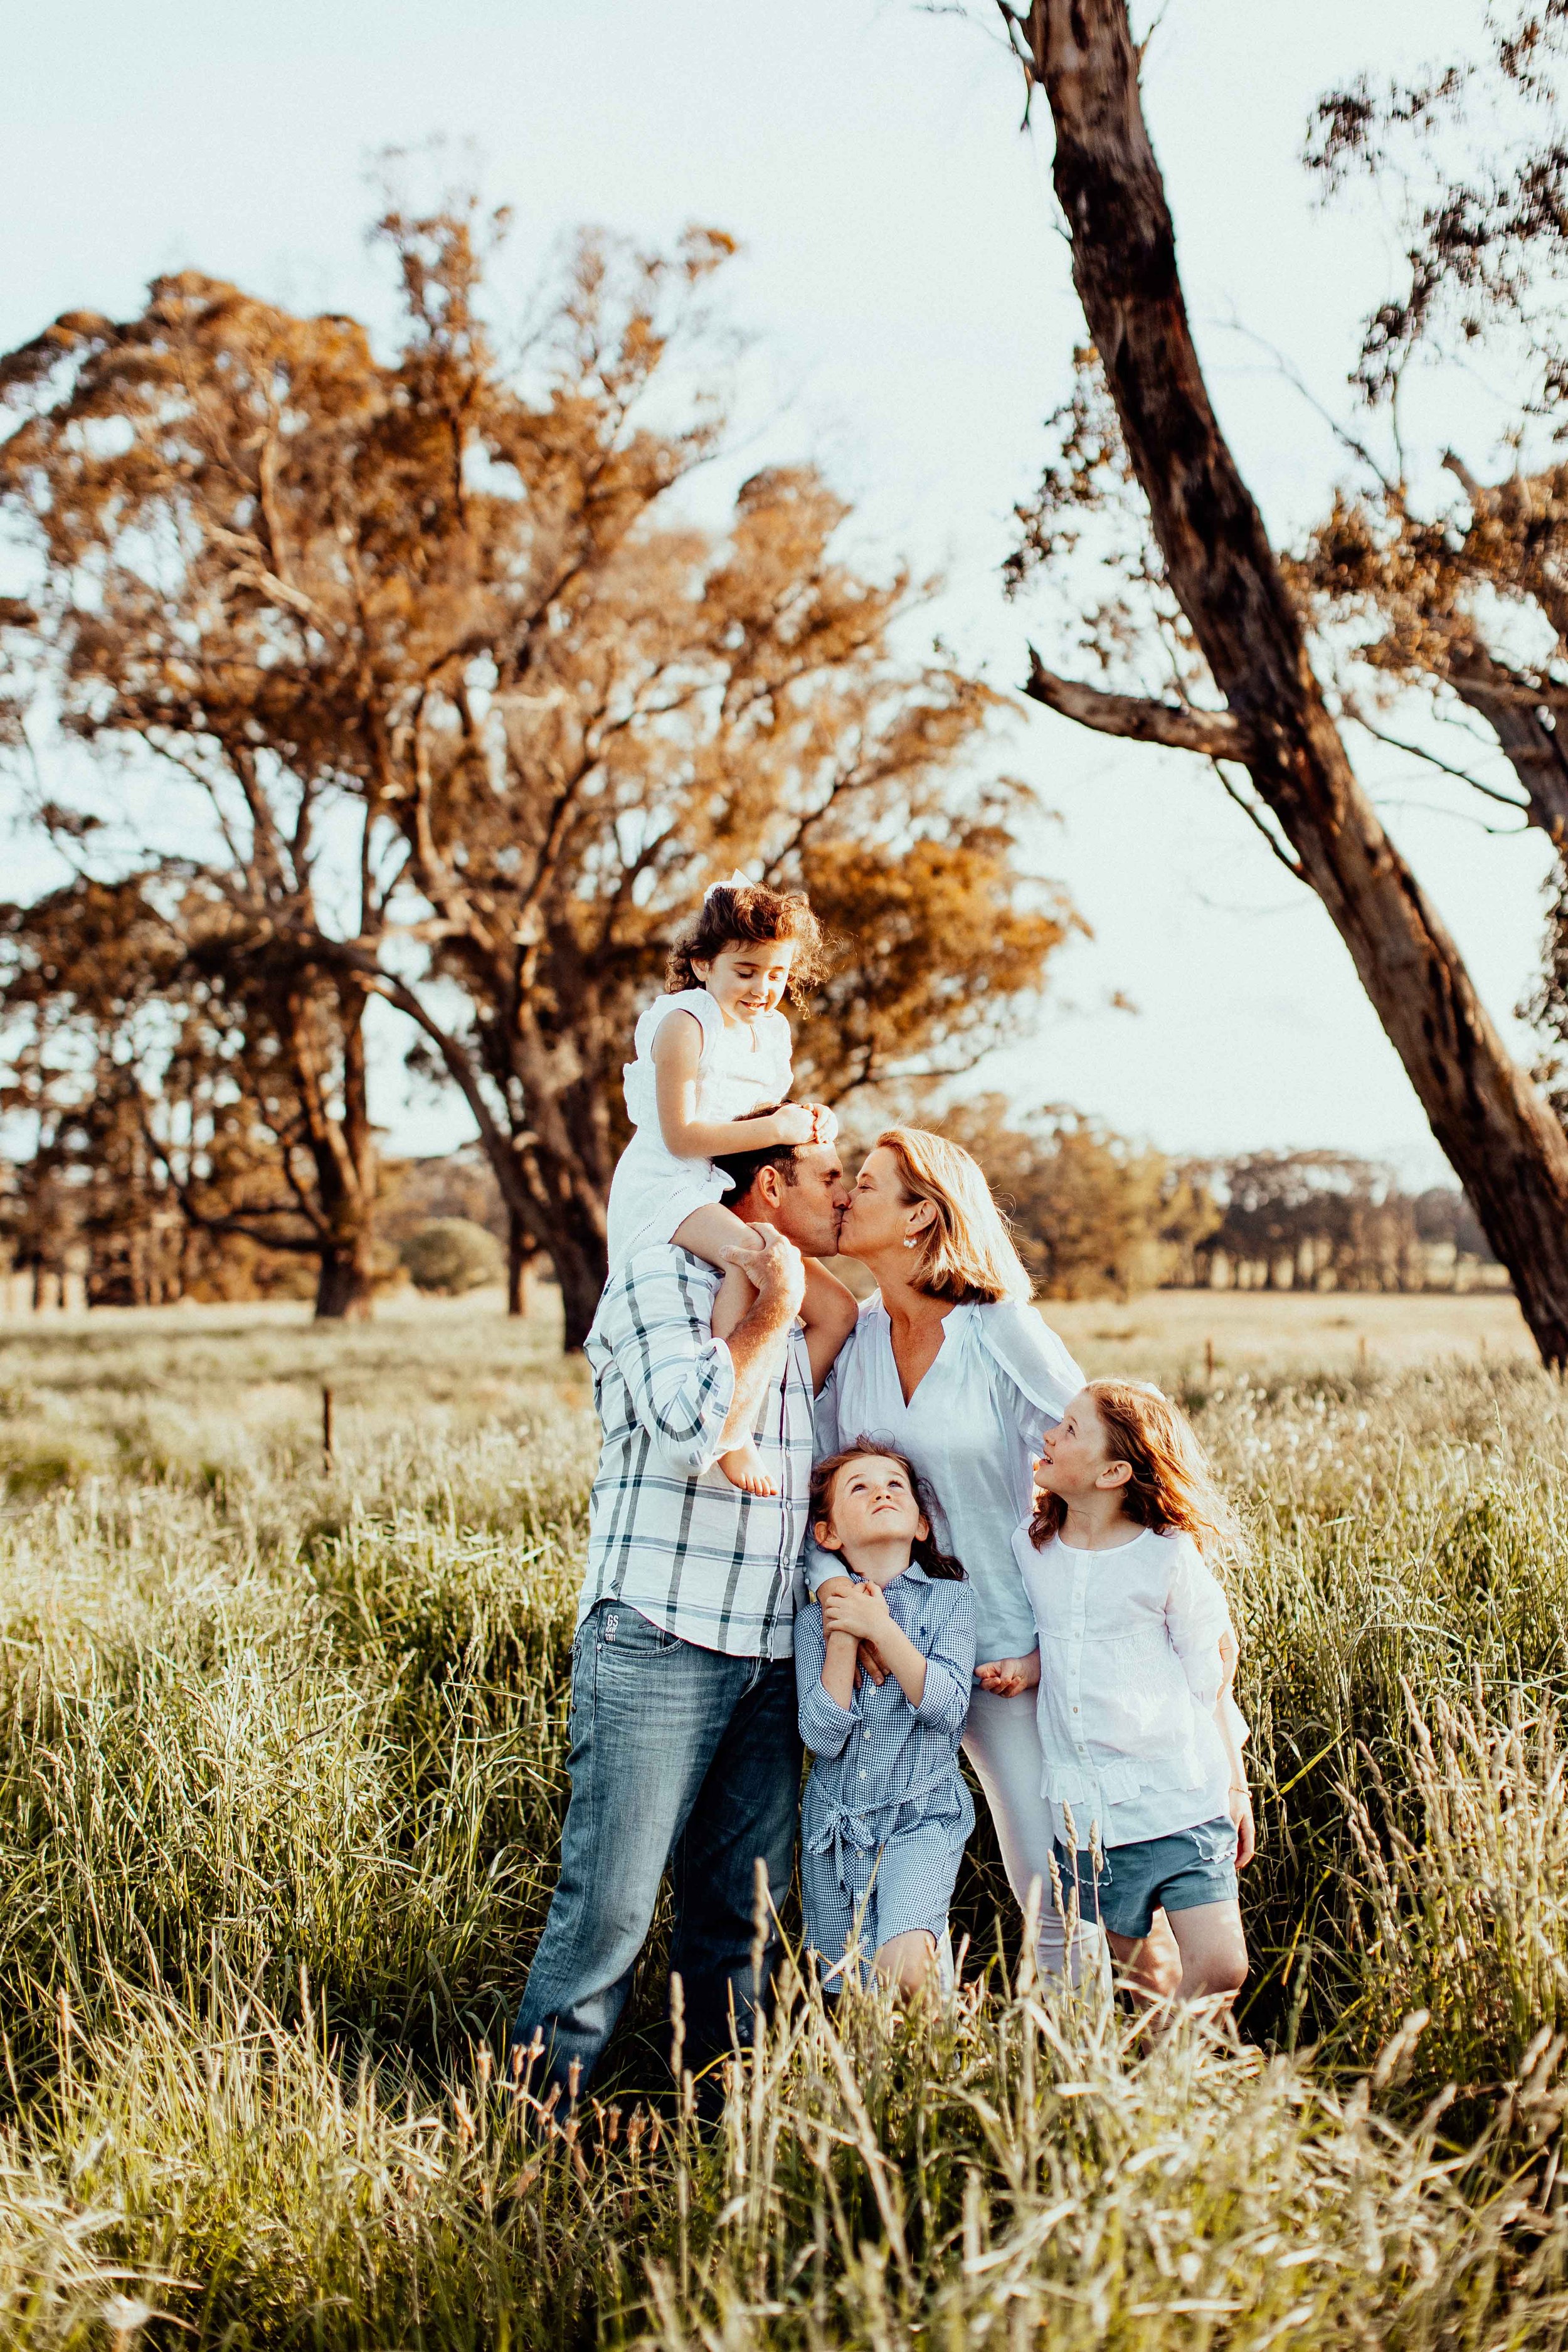 carroll-family-exeter-southern-hoghlands-inhome-family-lifestyle-wollondilly-camden-macarthur-sydney-photography-www.emilyobrienphotography.net-55.jpg